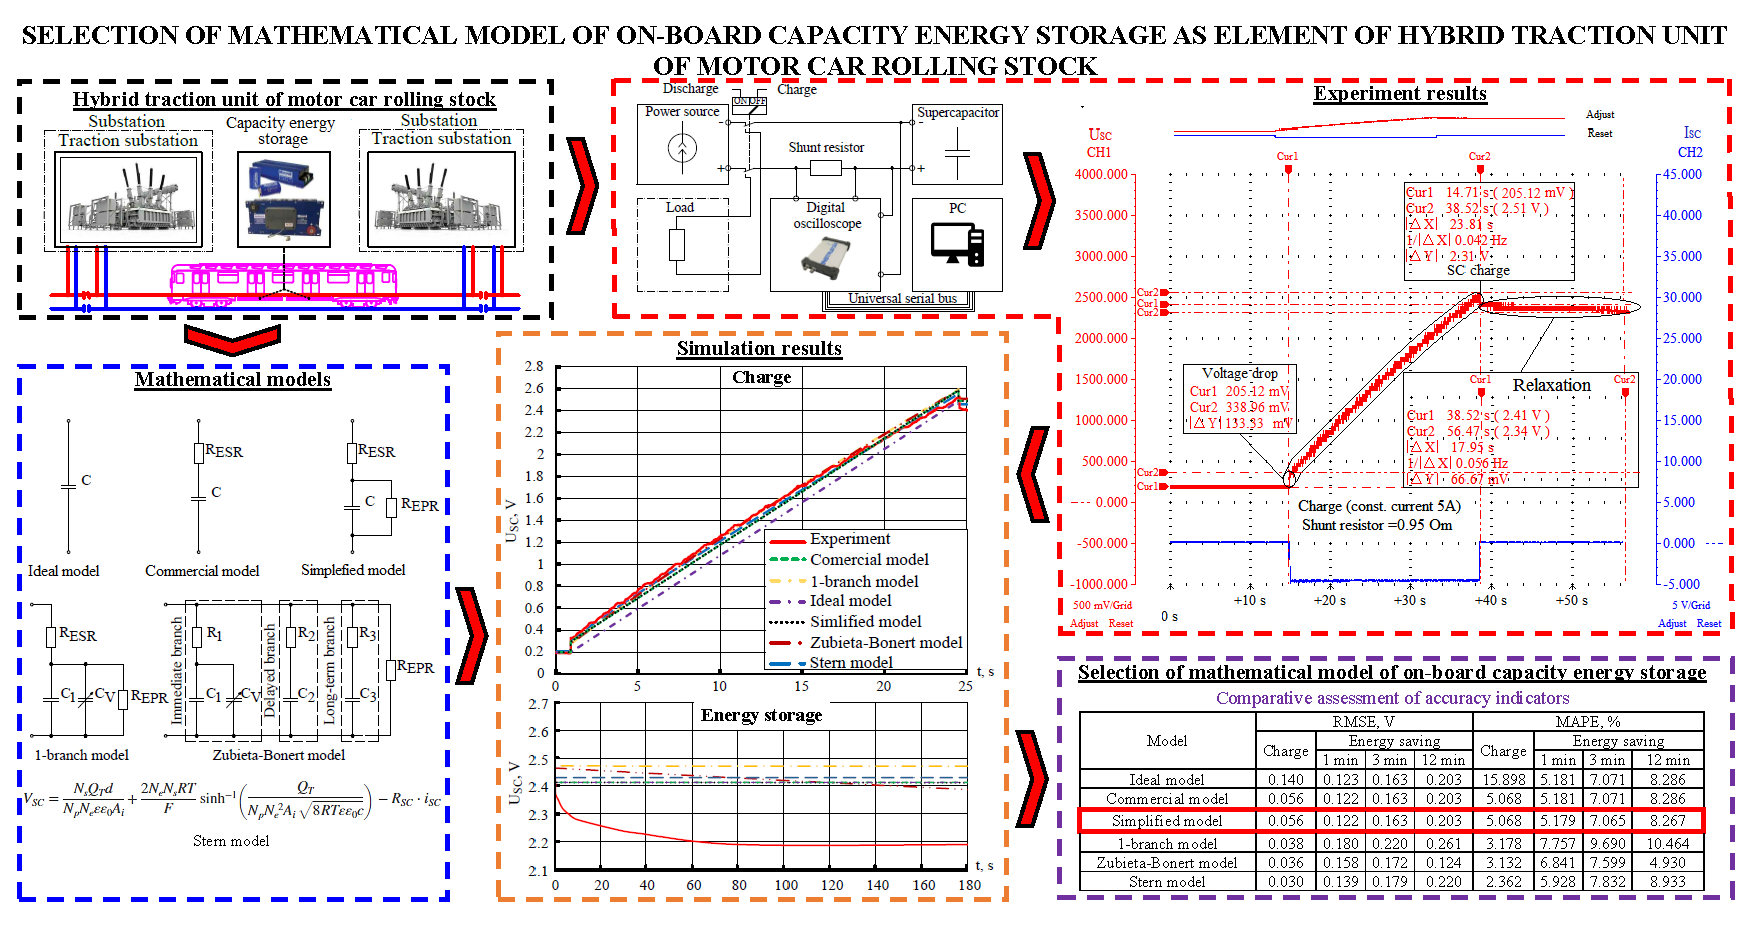 Selection of mathematical model of on-board capacity energy storage as element of hybrid traction unit of motor car rolling stock